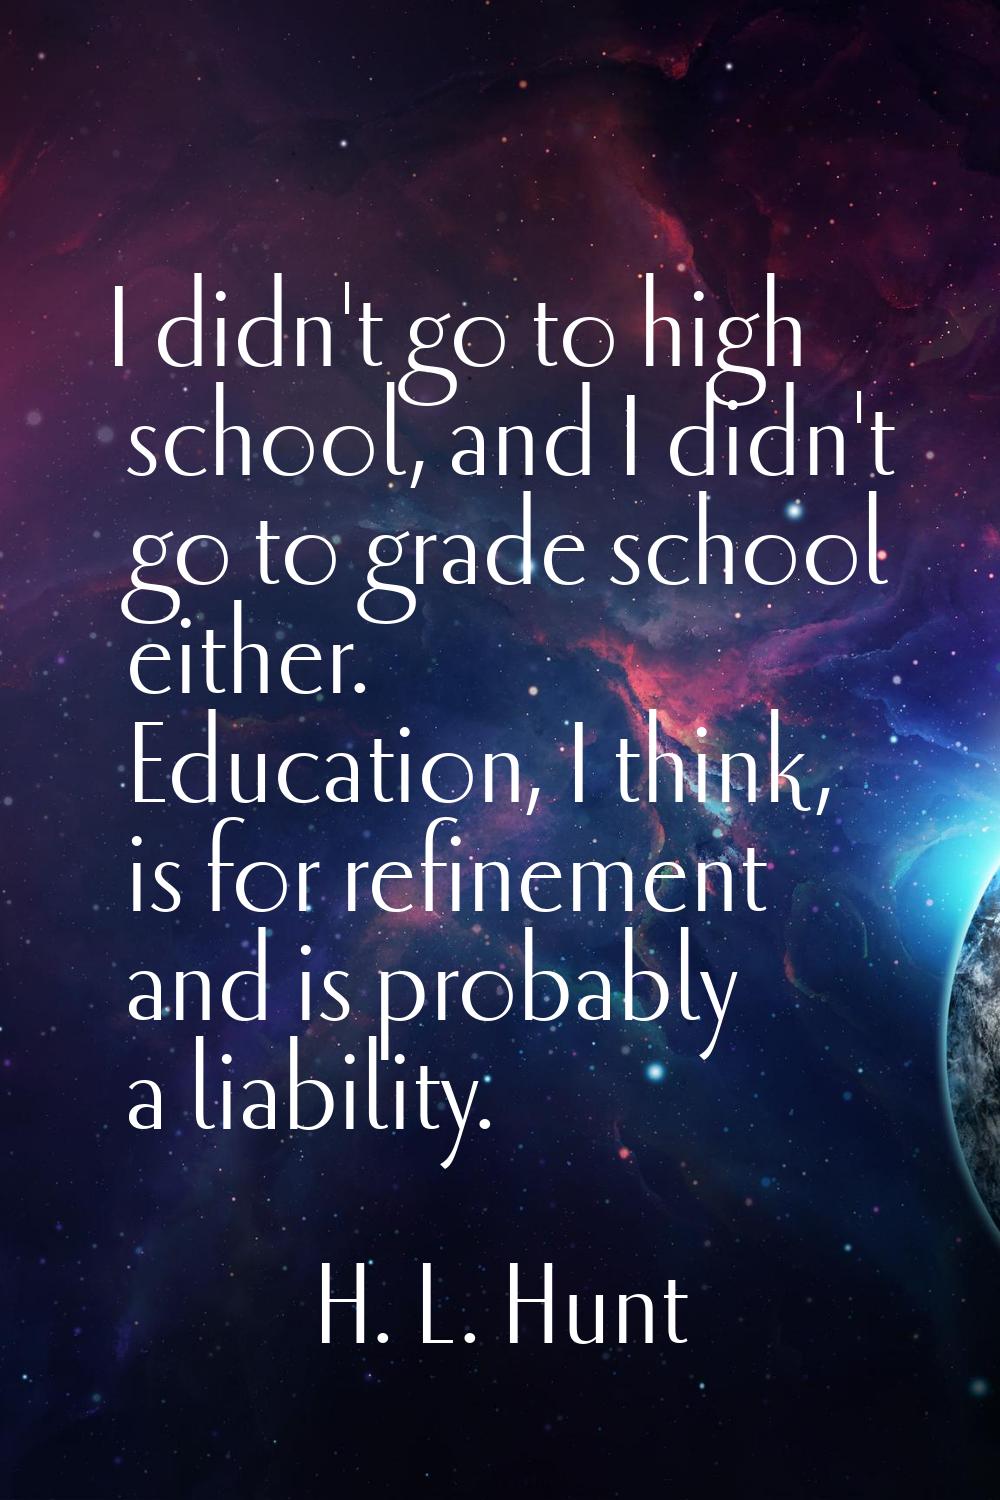 I didn't go to high school, and I didn't go to grade school either. Education, I think, is for refi